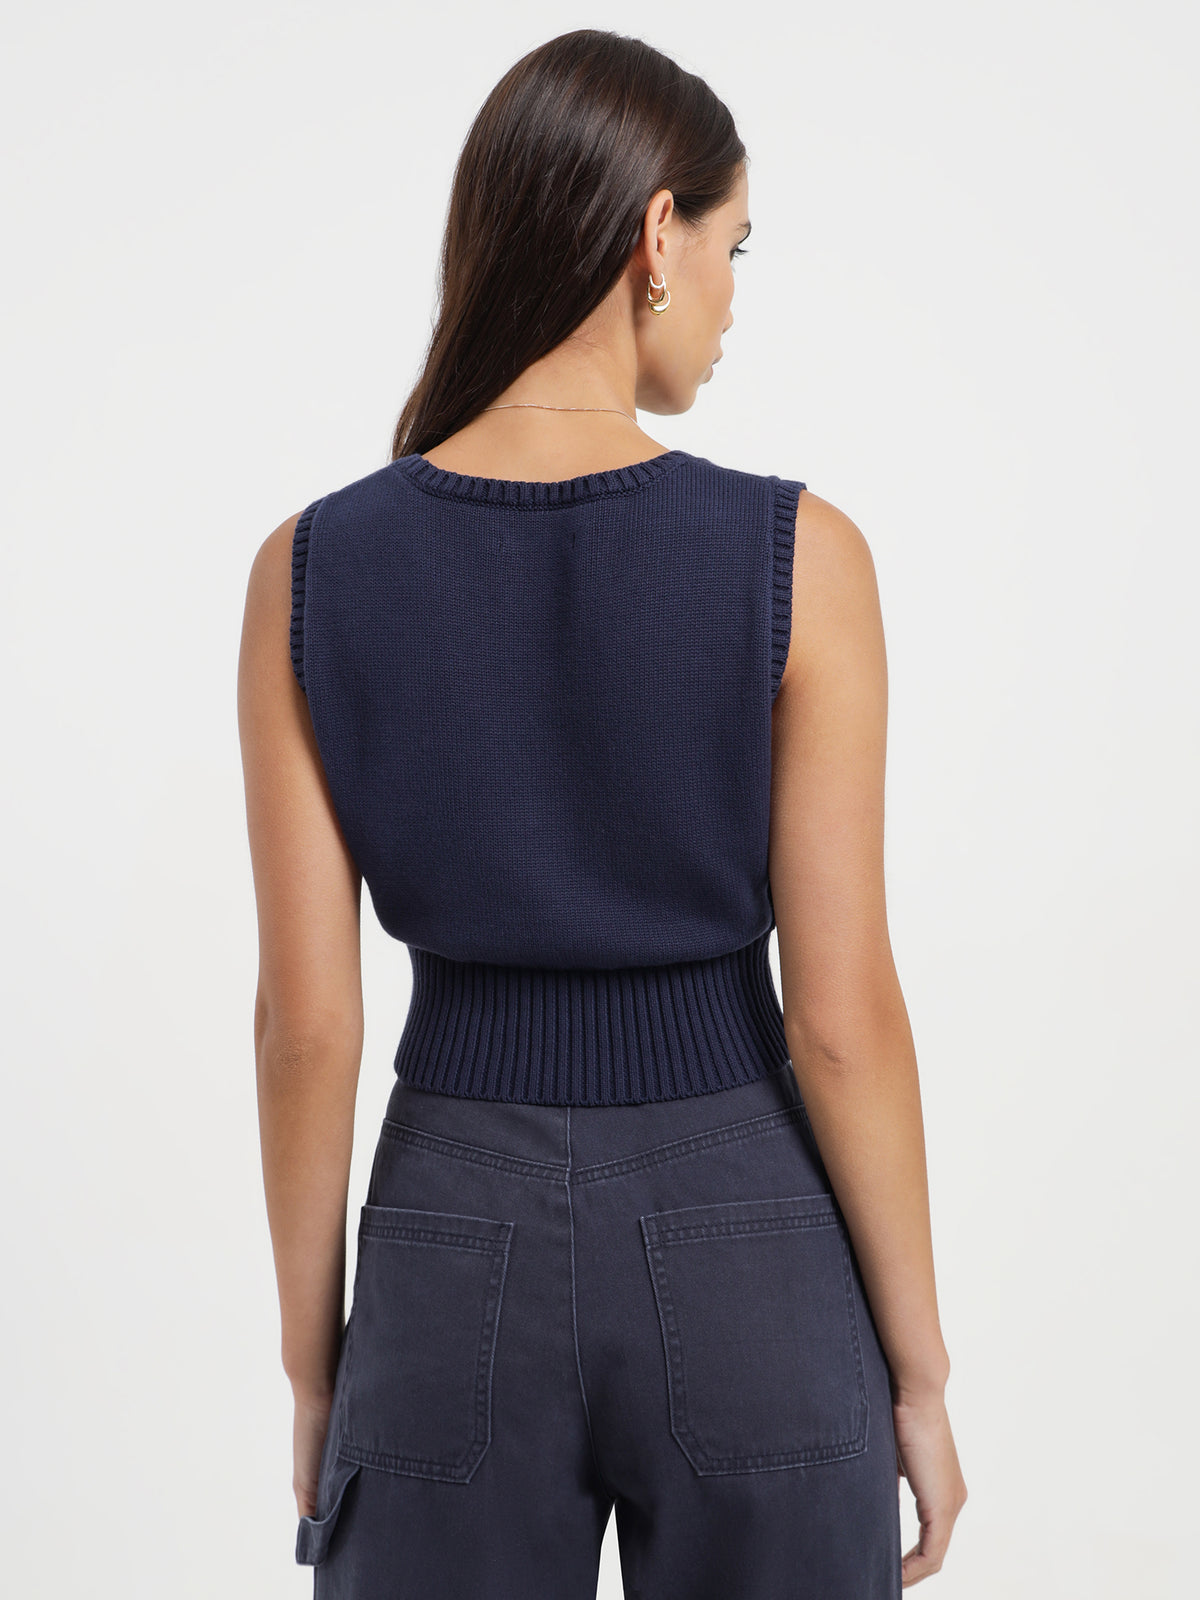 Marissa Cropped Knit in Navy